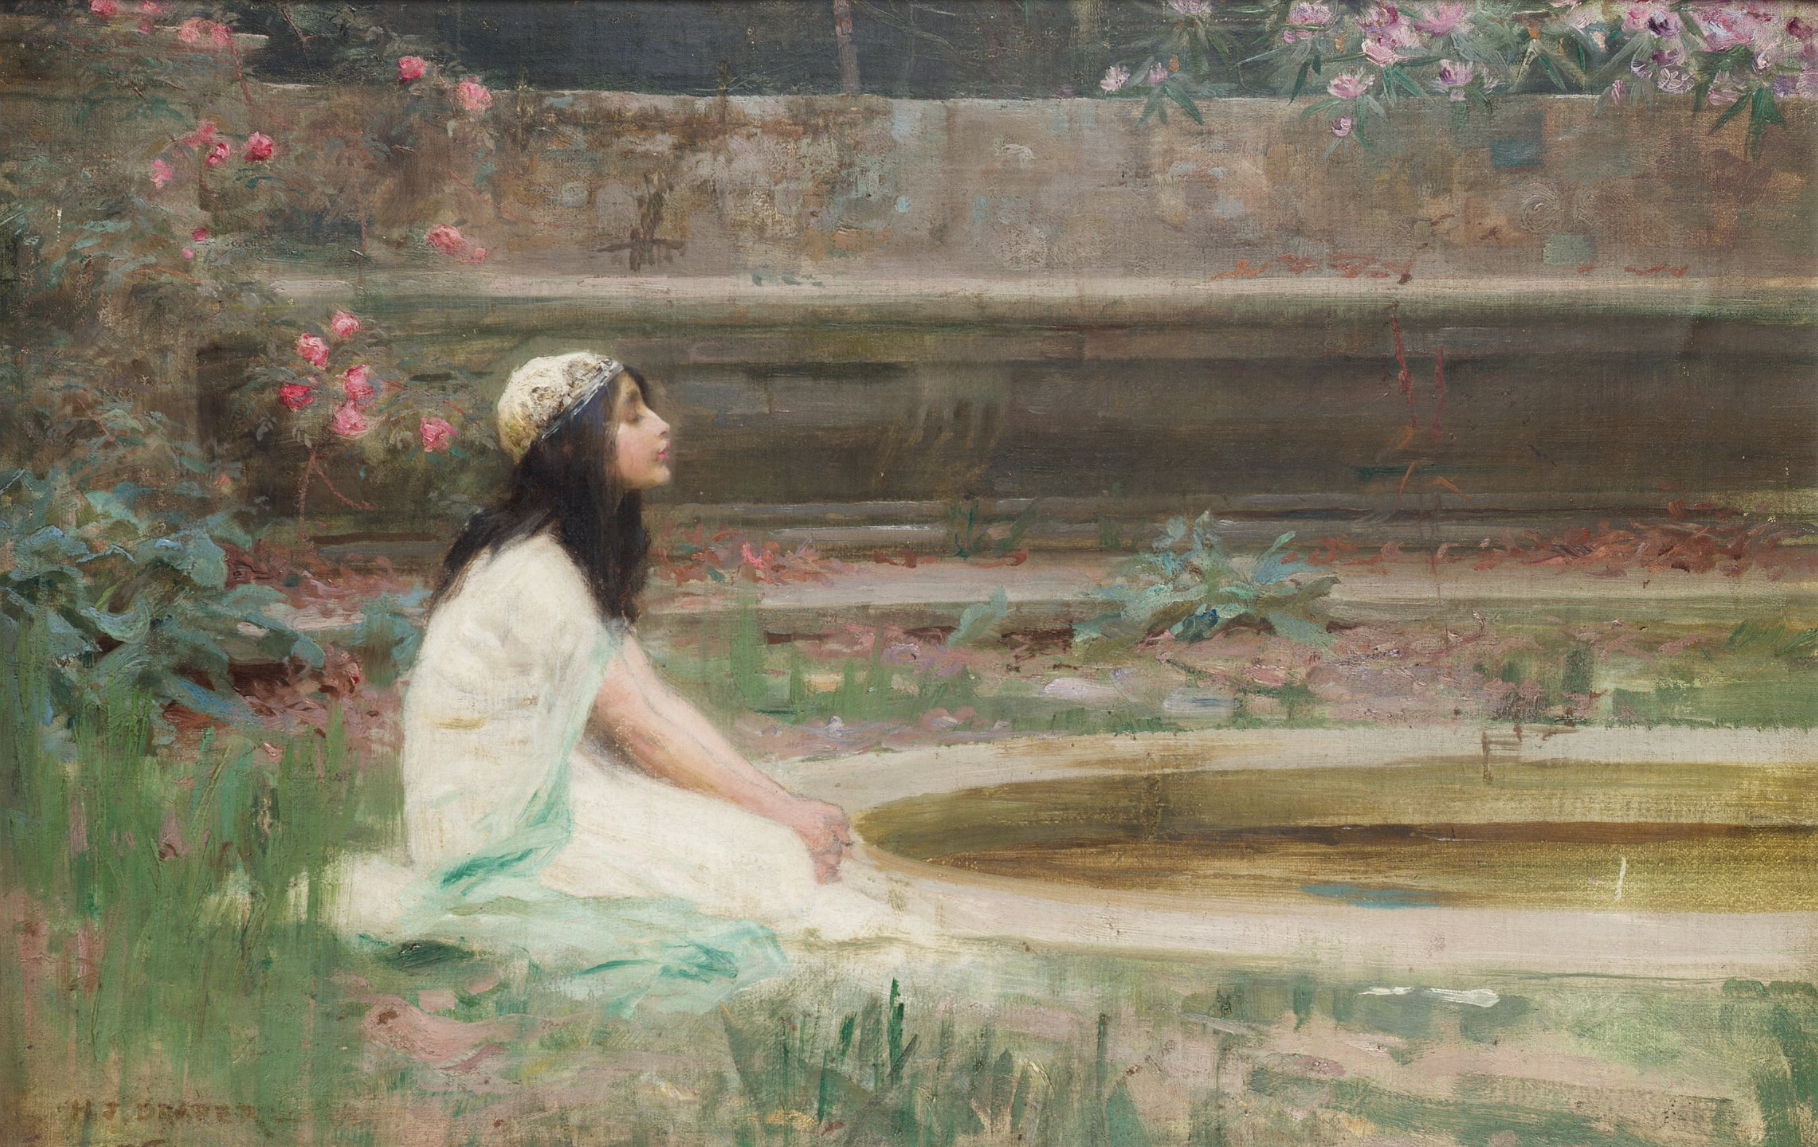 Inspiration: “A Young Girl By a Pool,” by Herbert James Draper